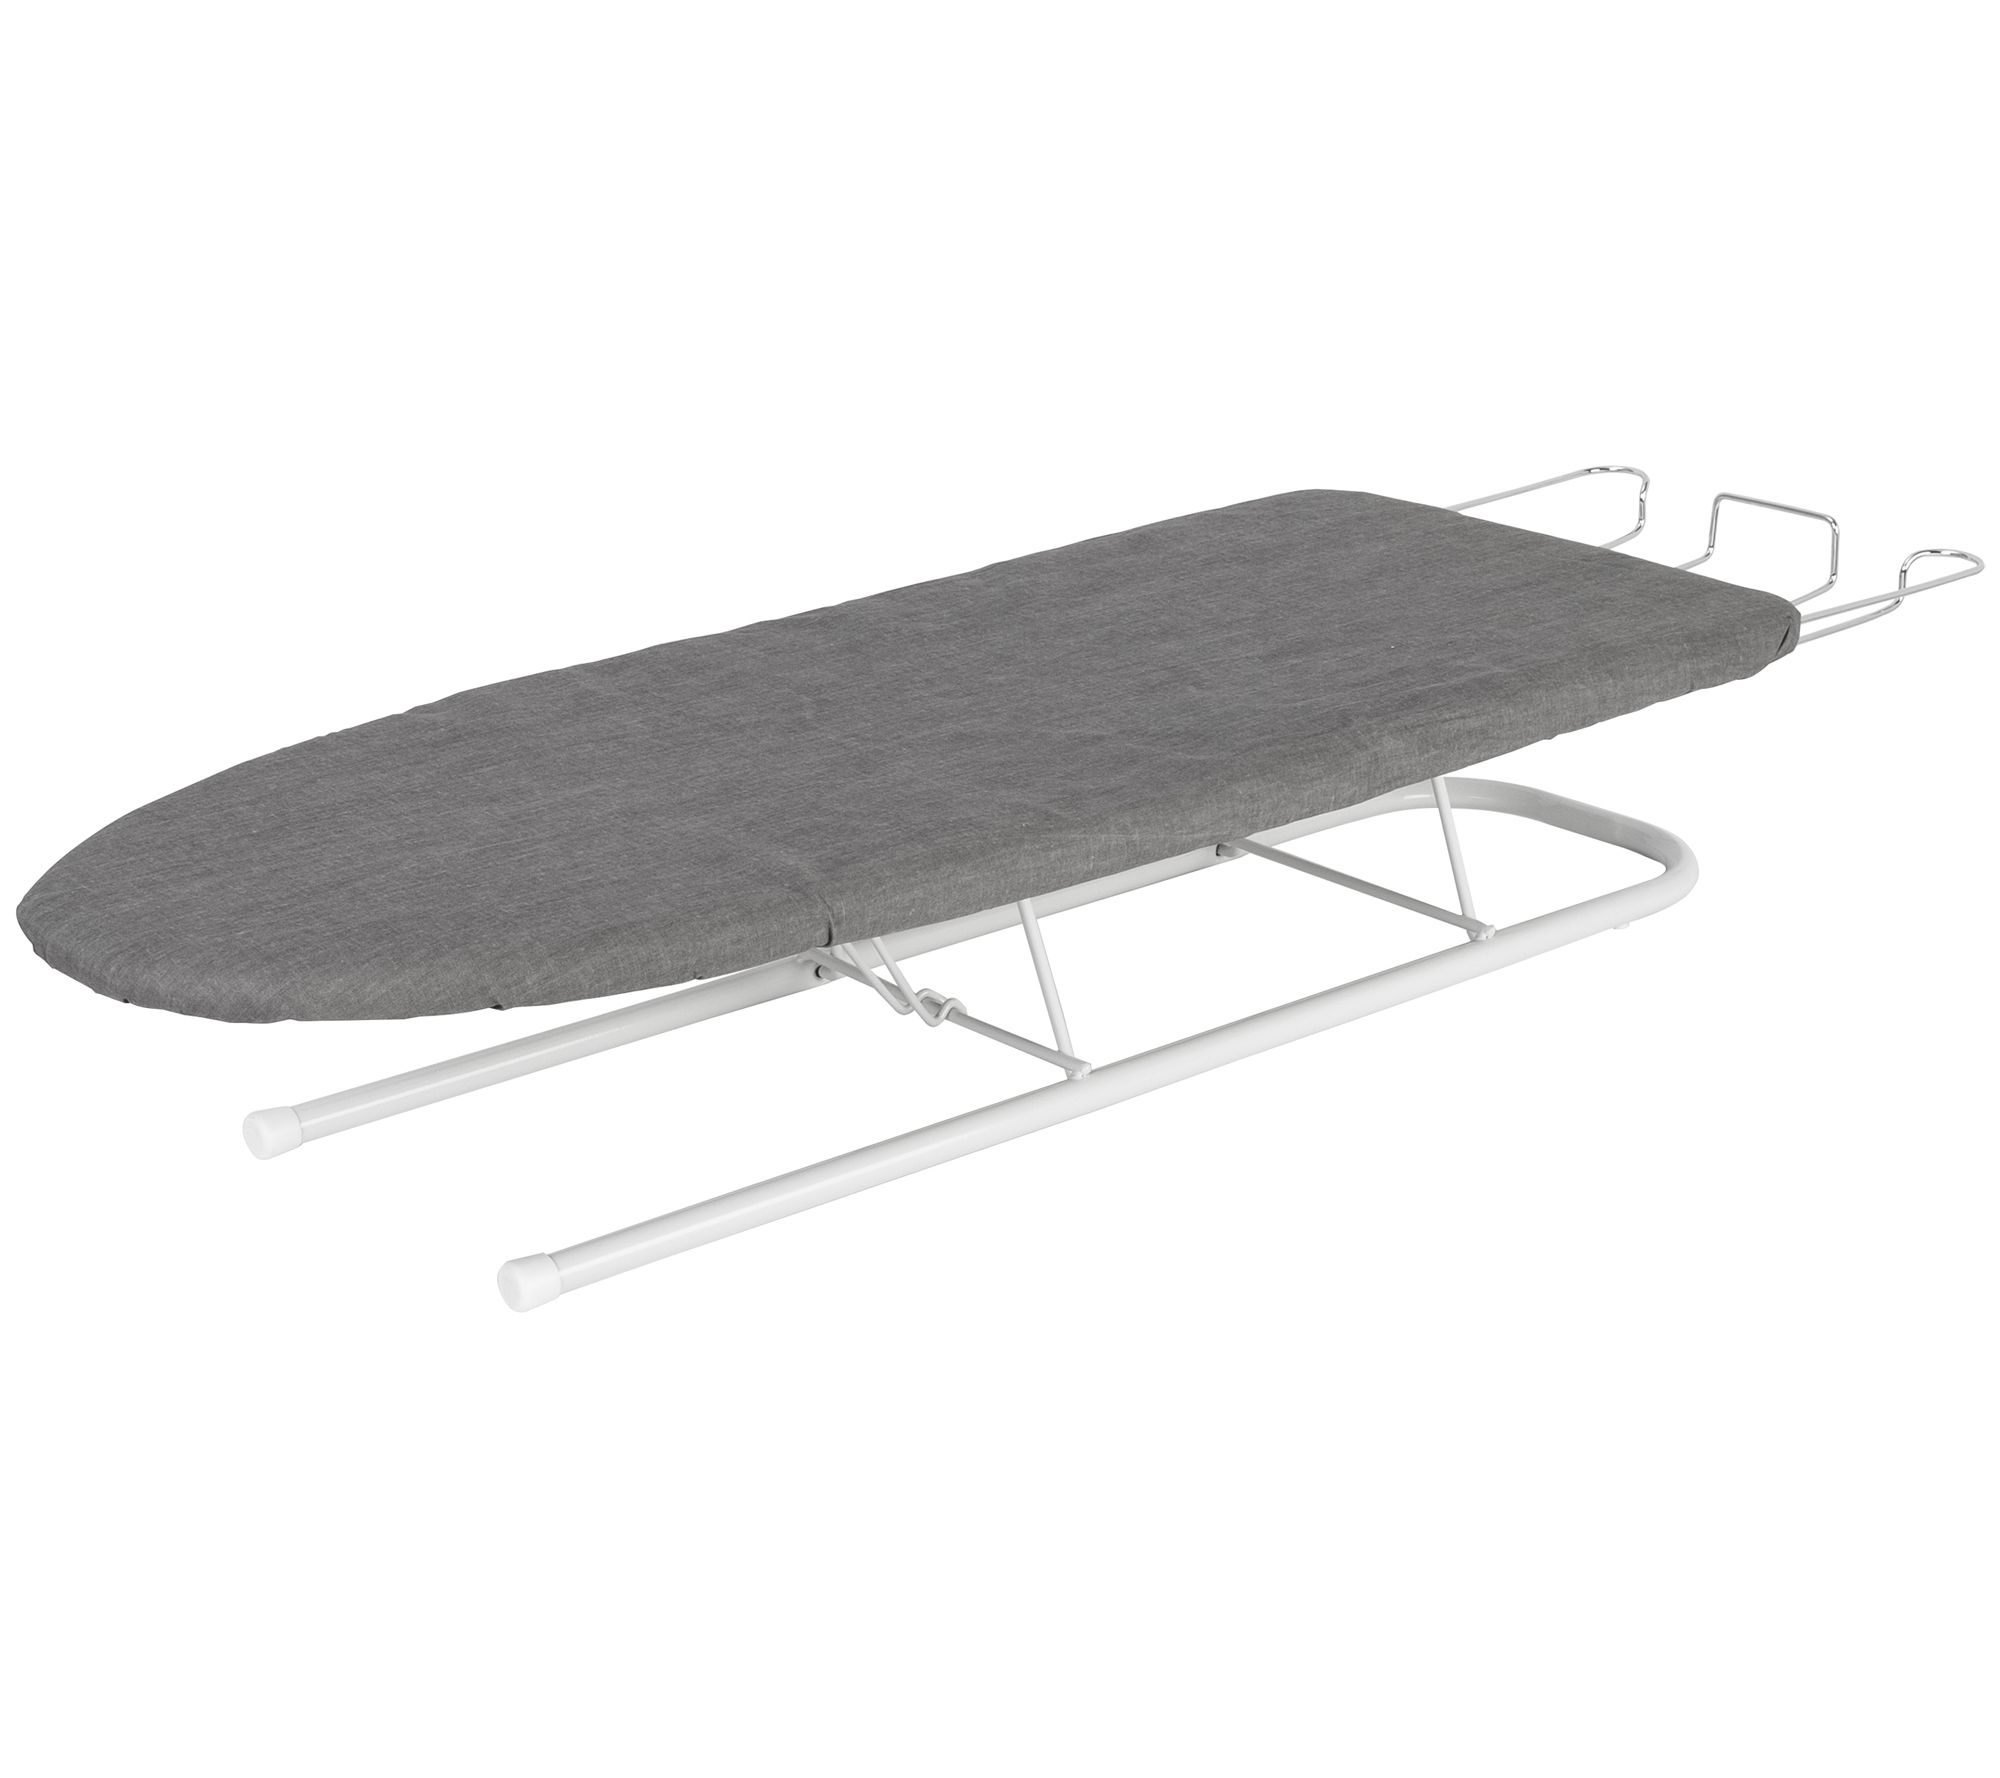 Dritz Collapsible Table Top Ironing Board : Target